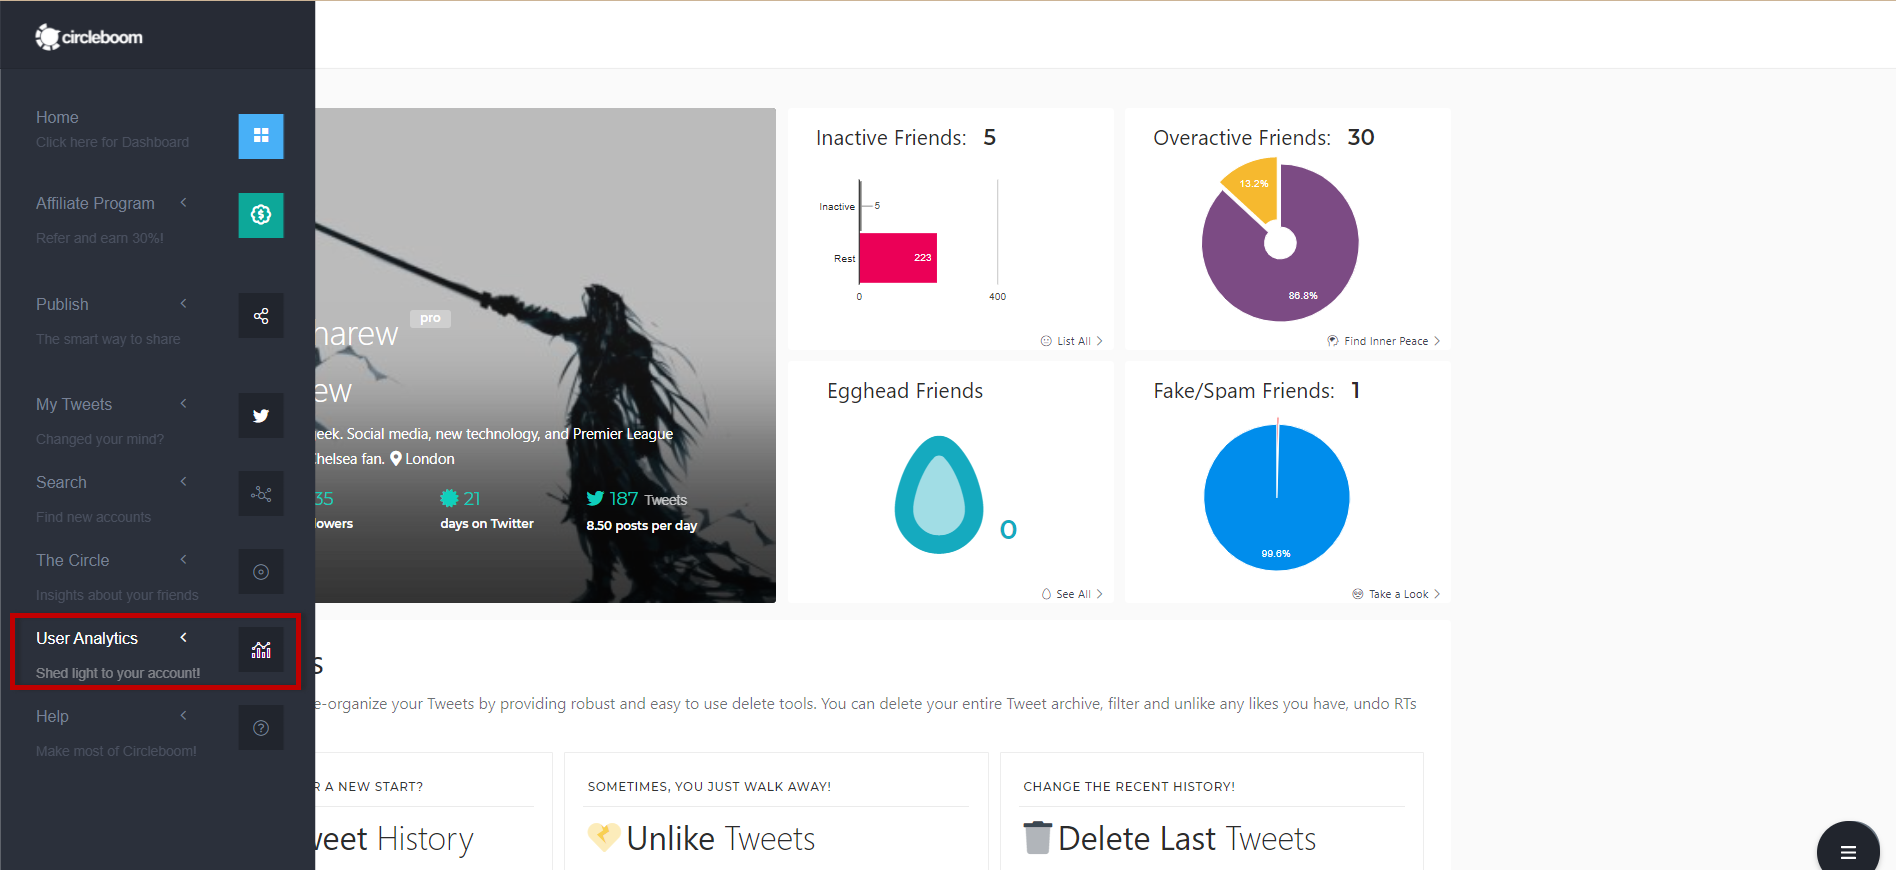 You can check your Tweet Statistics on Circleboom Twitter.